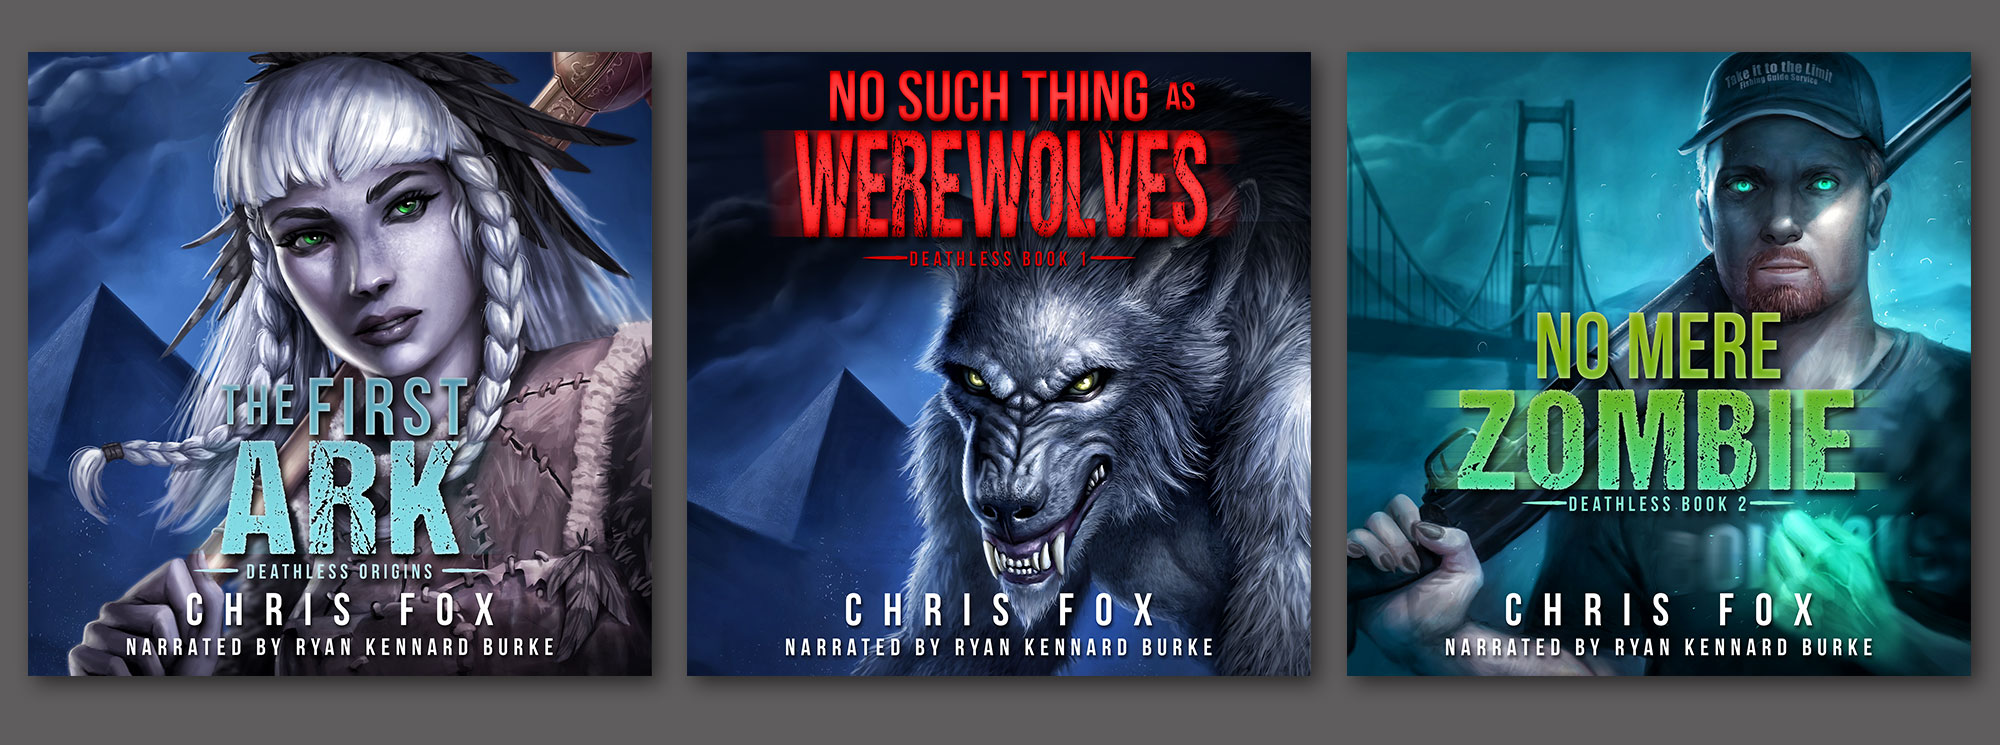 Official cover art for Chris Fox's science fiction/fantasy series 